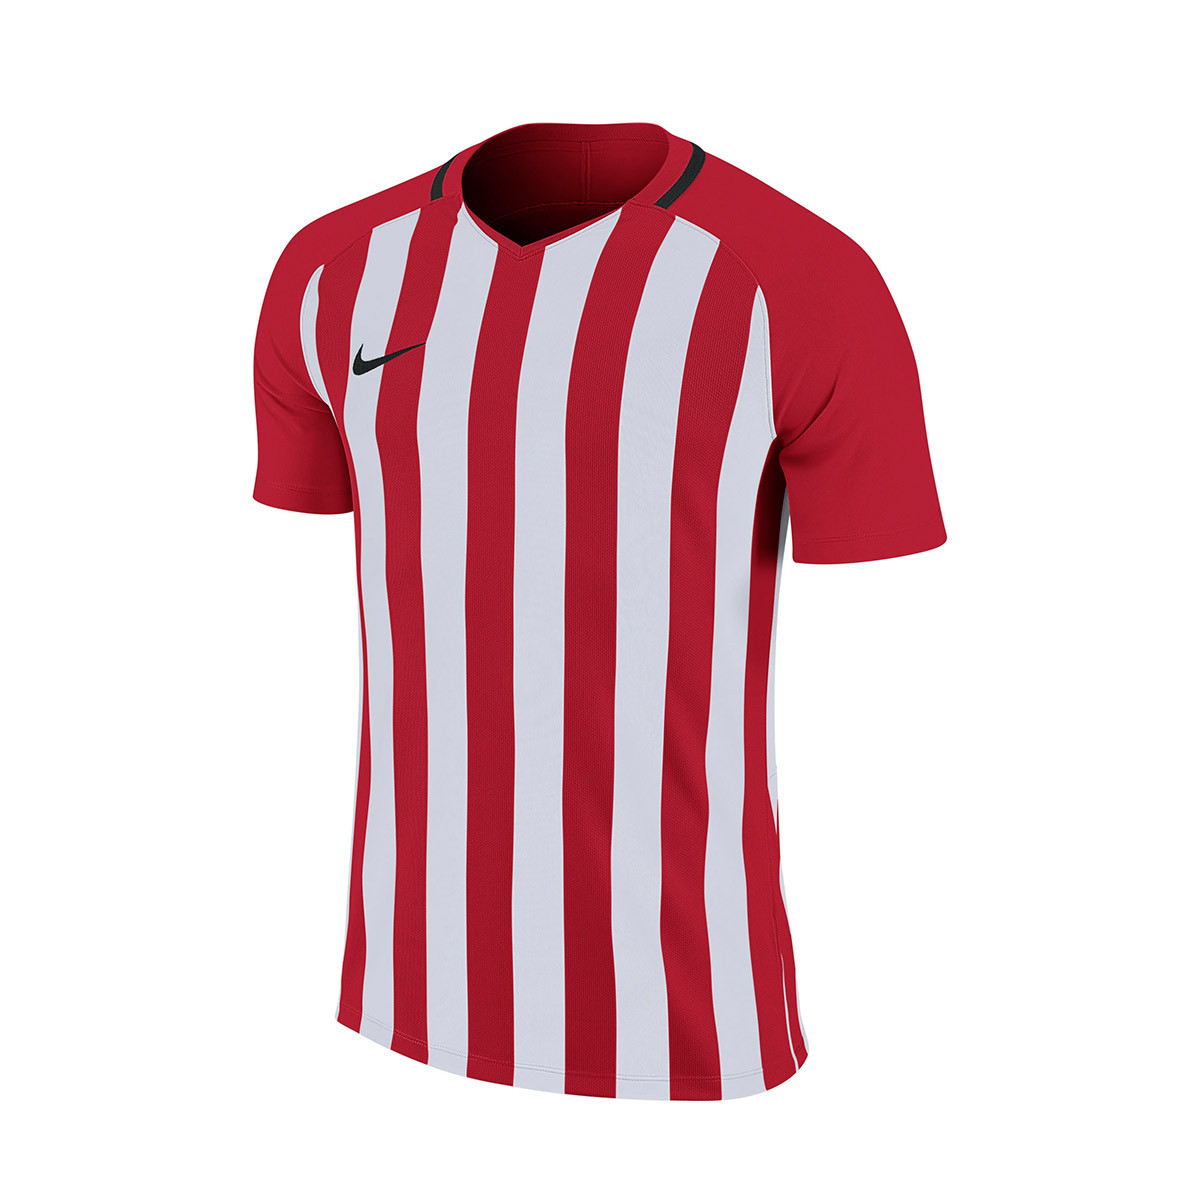 white and red jersey